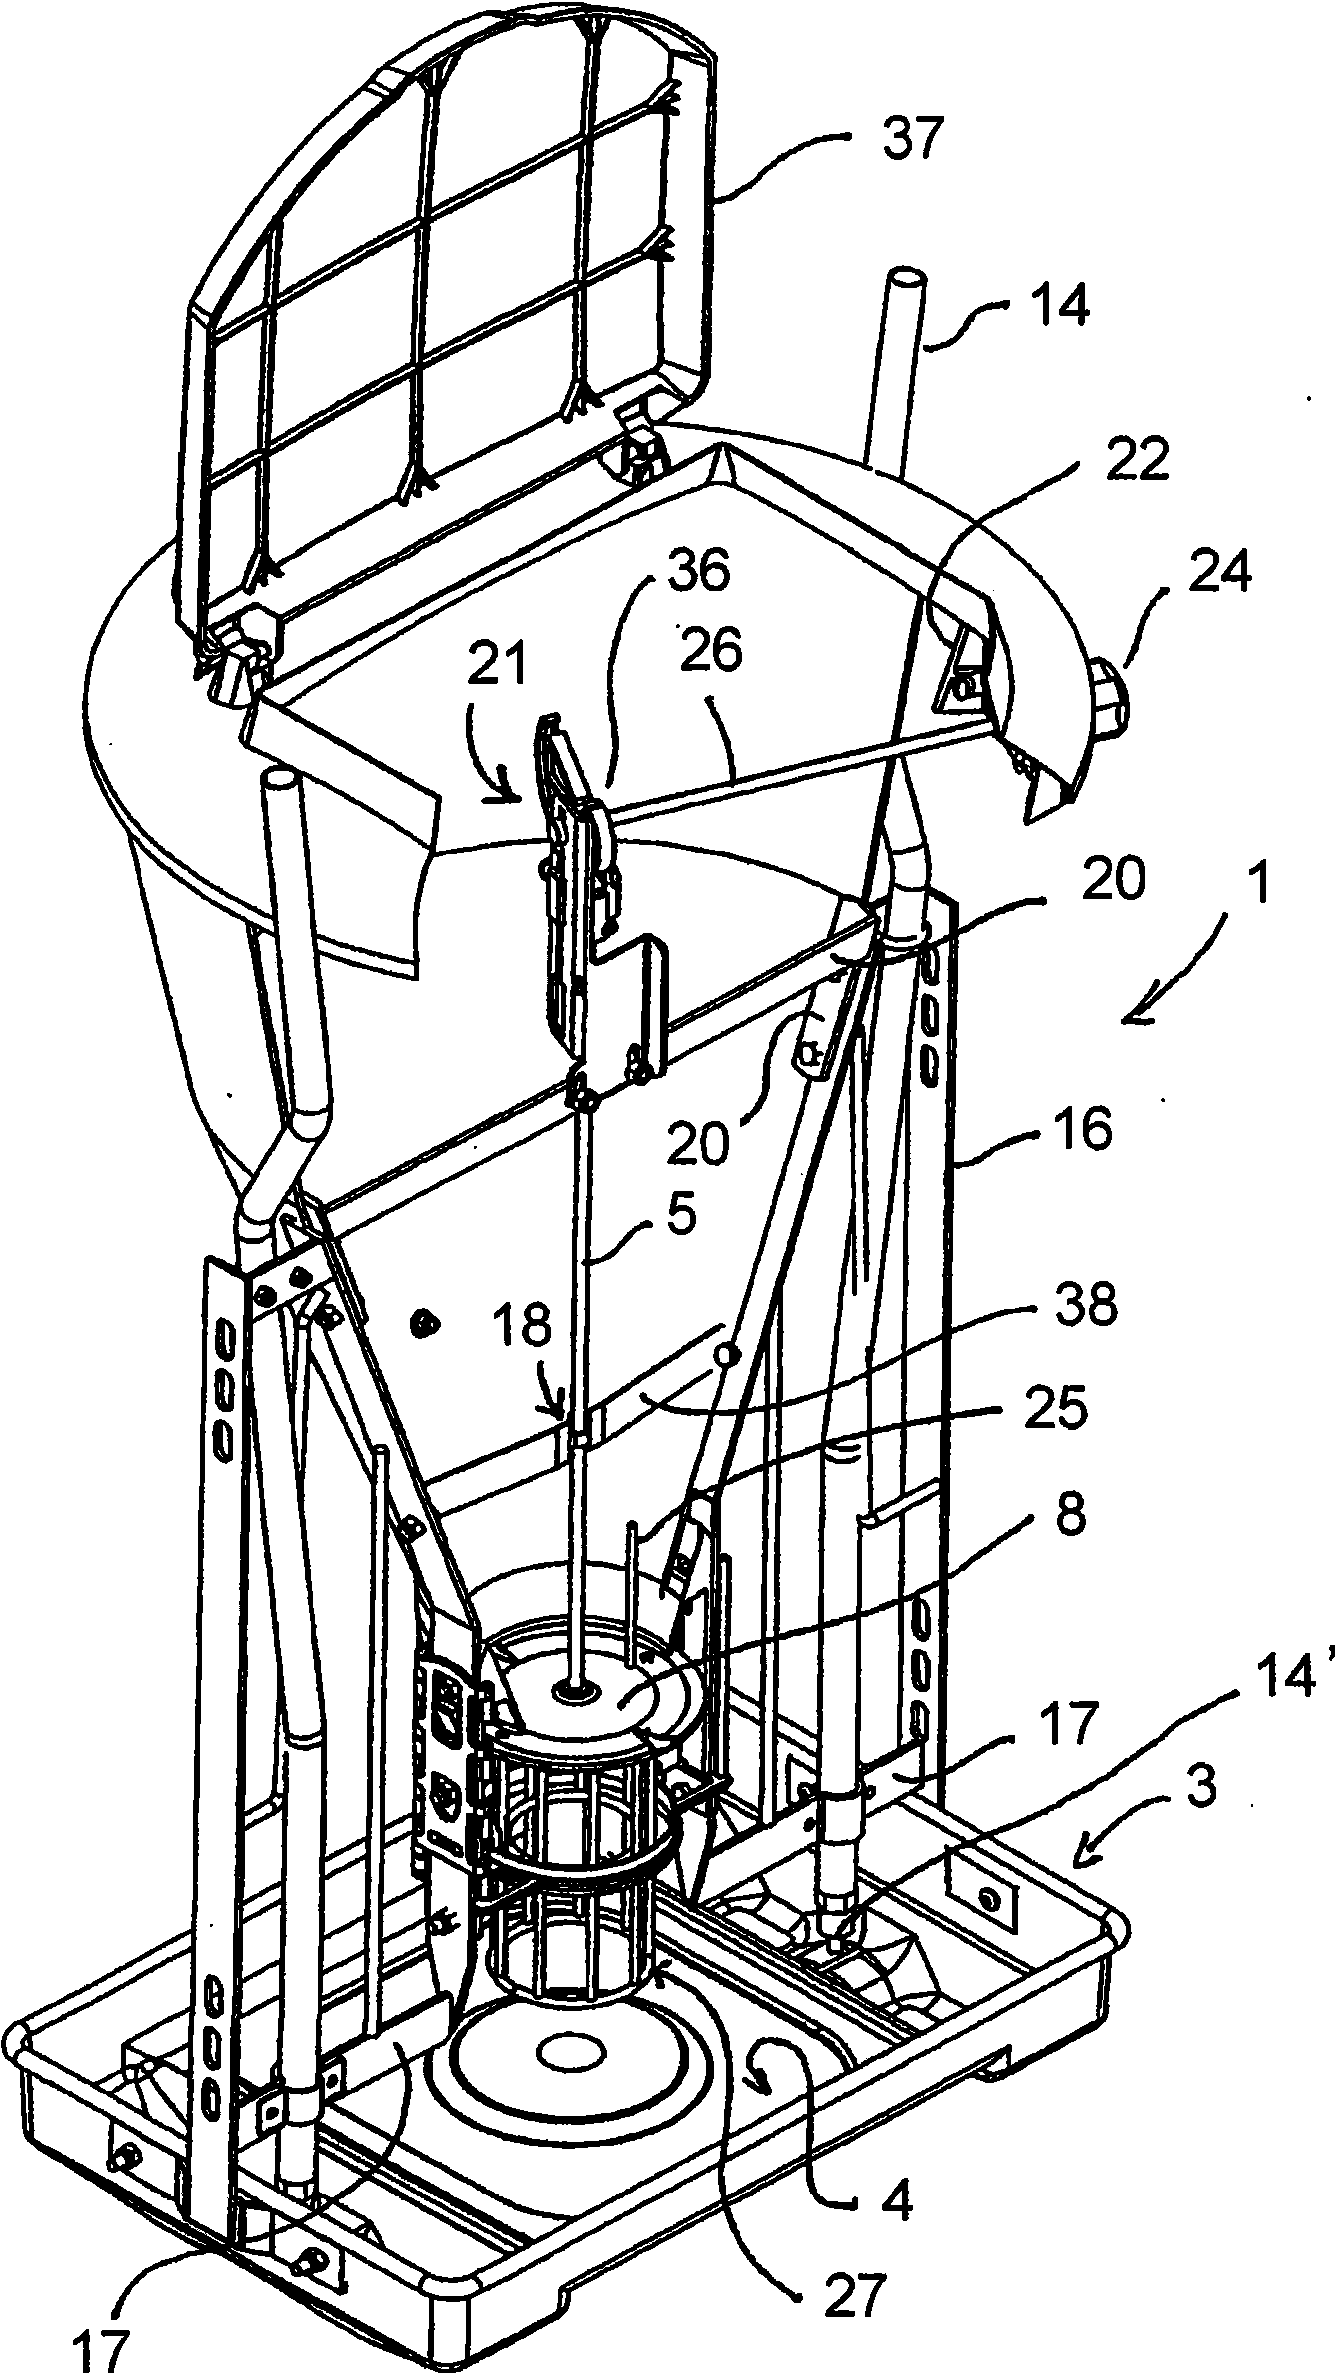 Feeding device with grate